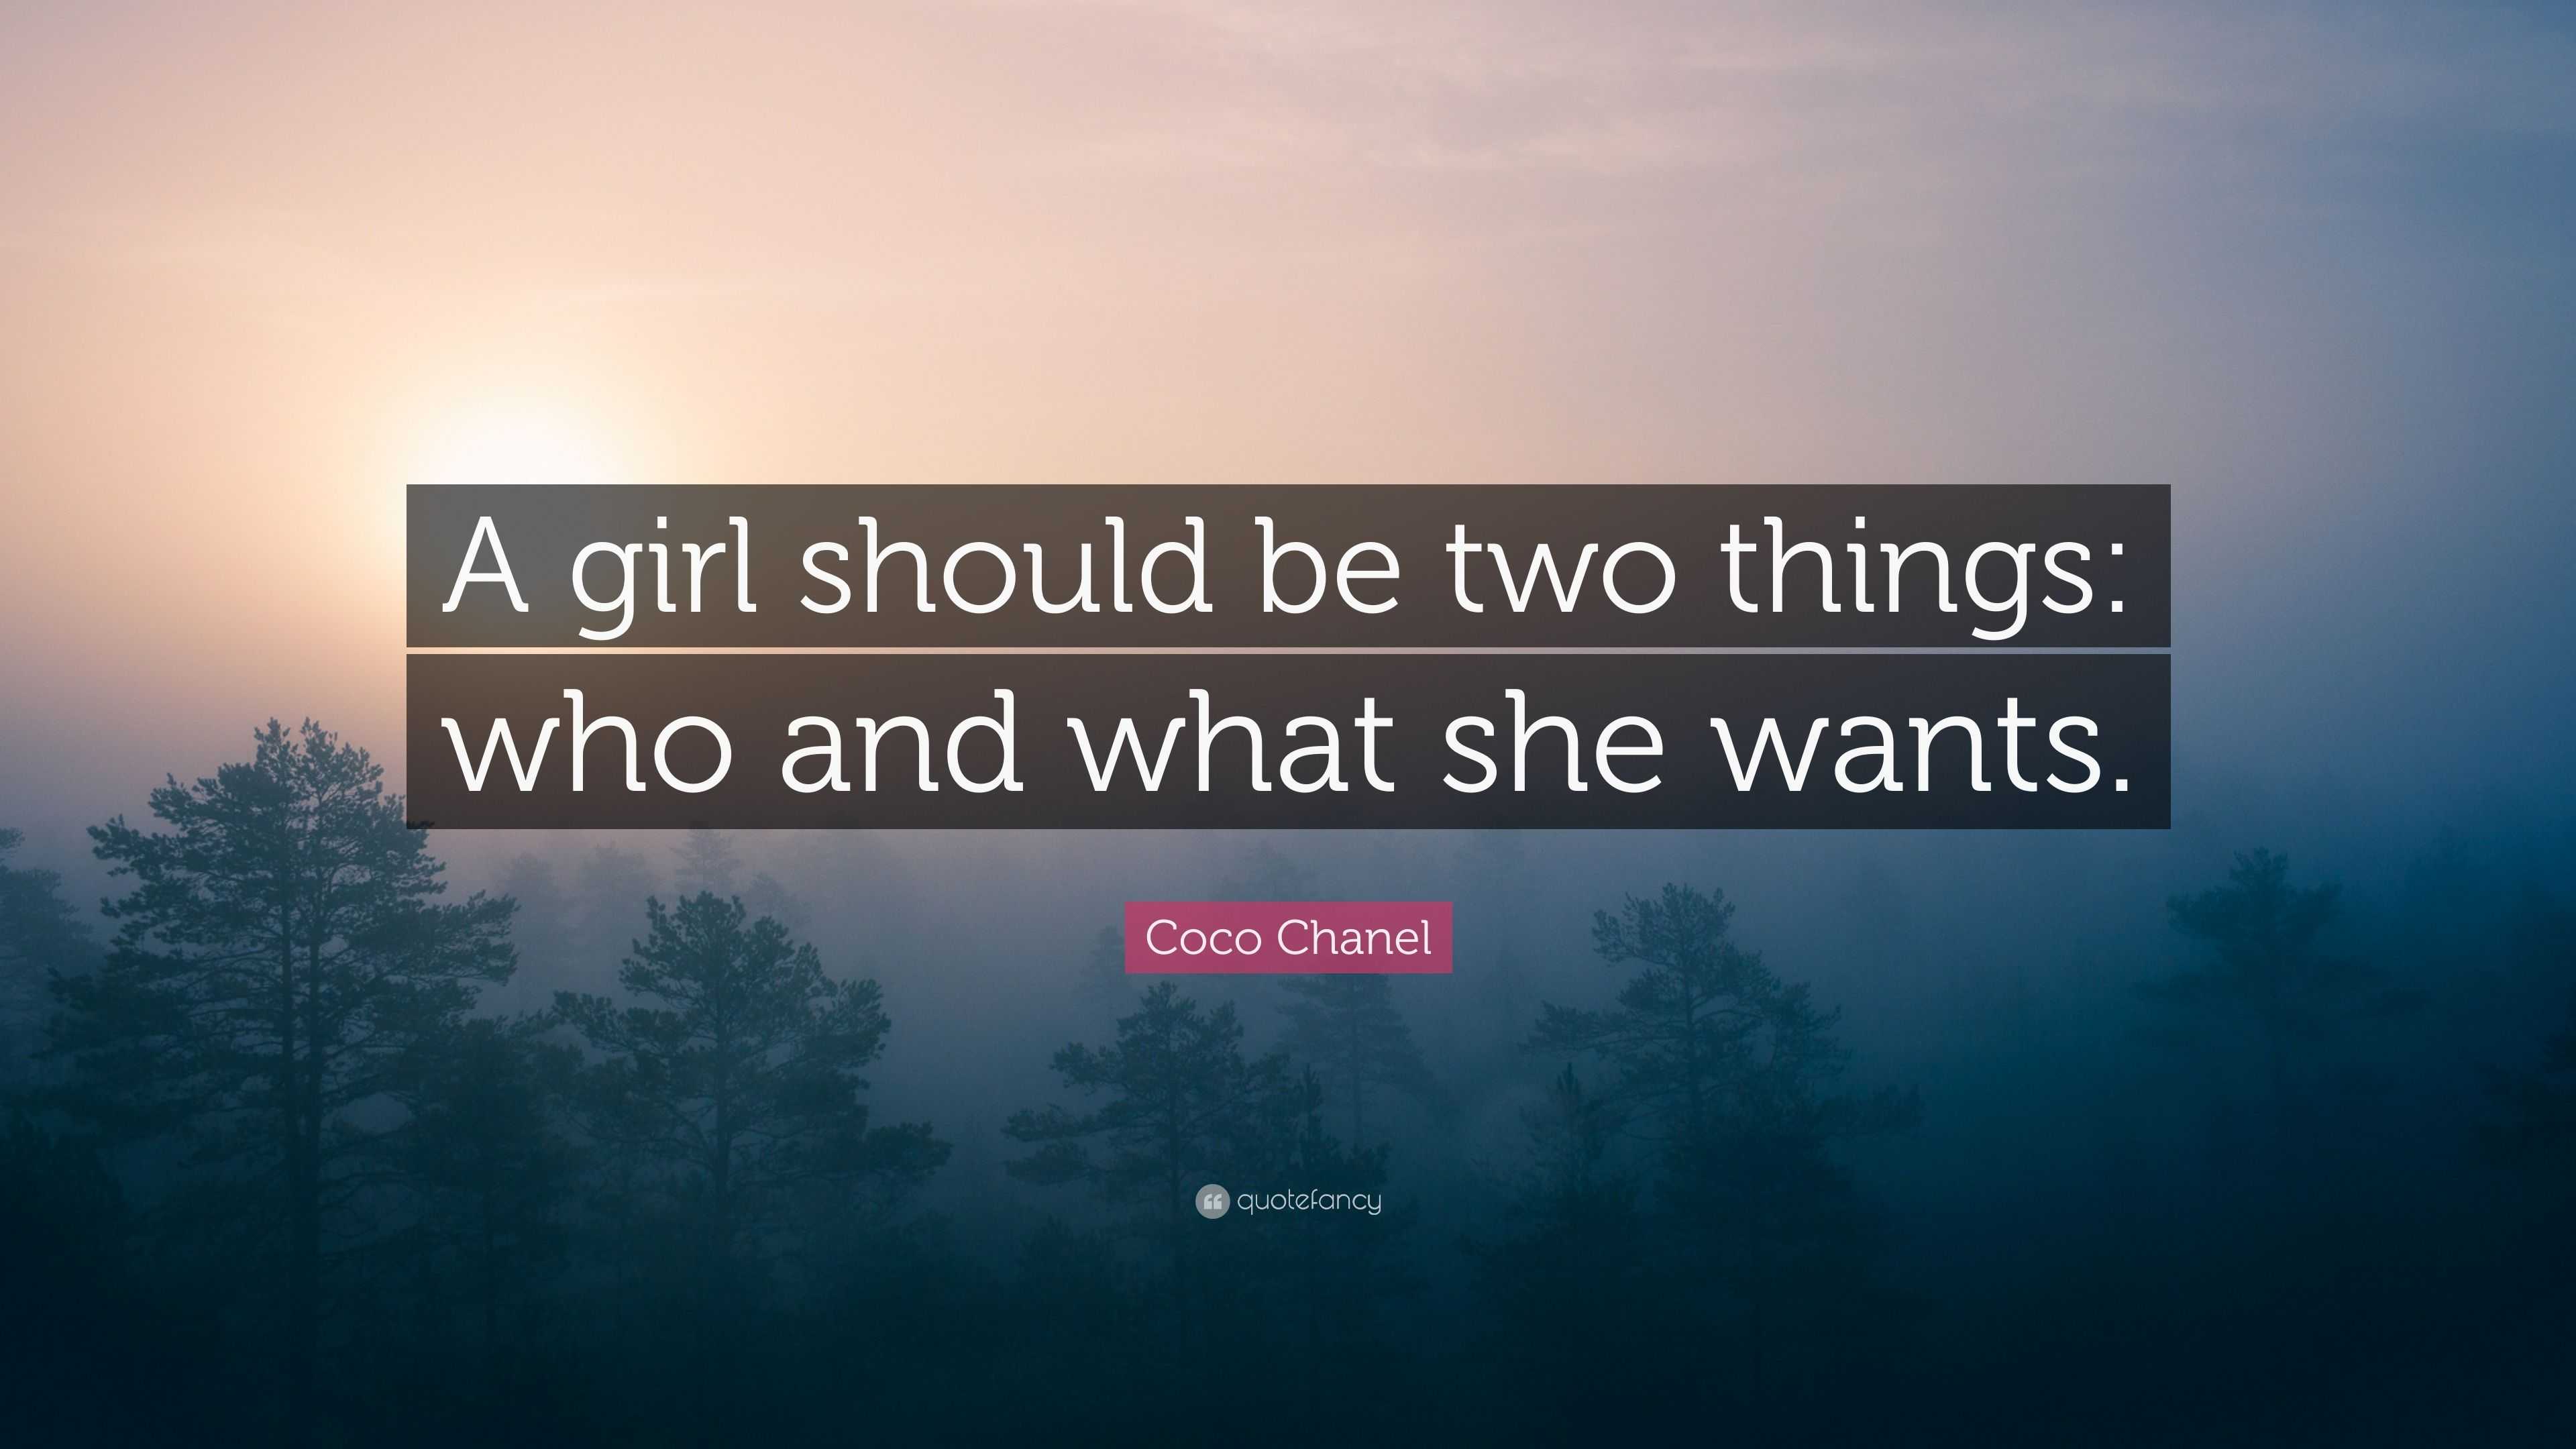 Coco Chanel Quote: “A girl should be two things: who and what she wants